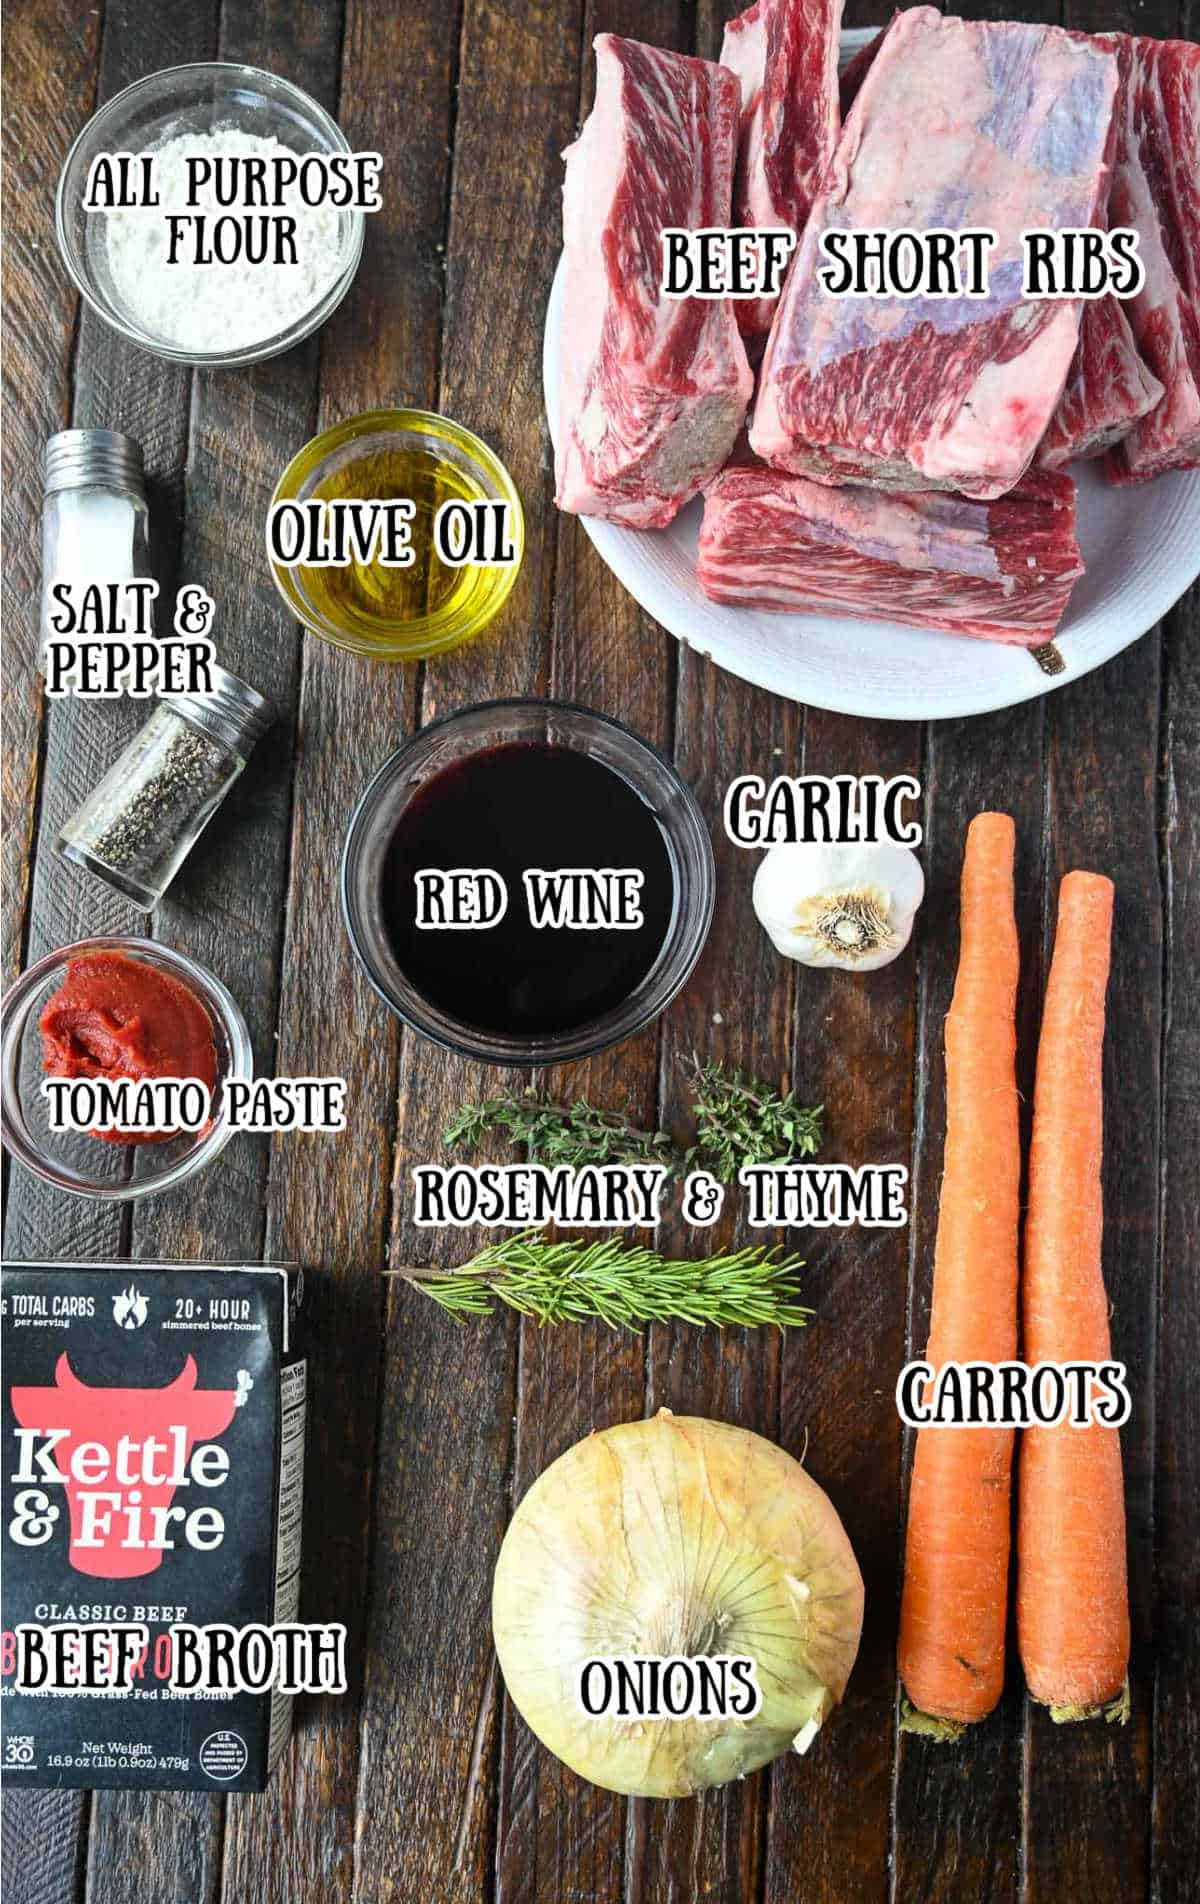 All the ingredients needed for this short ribs.